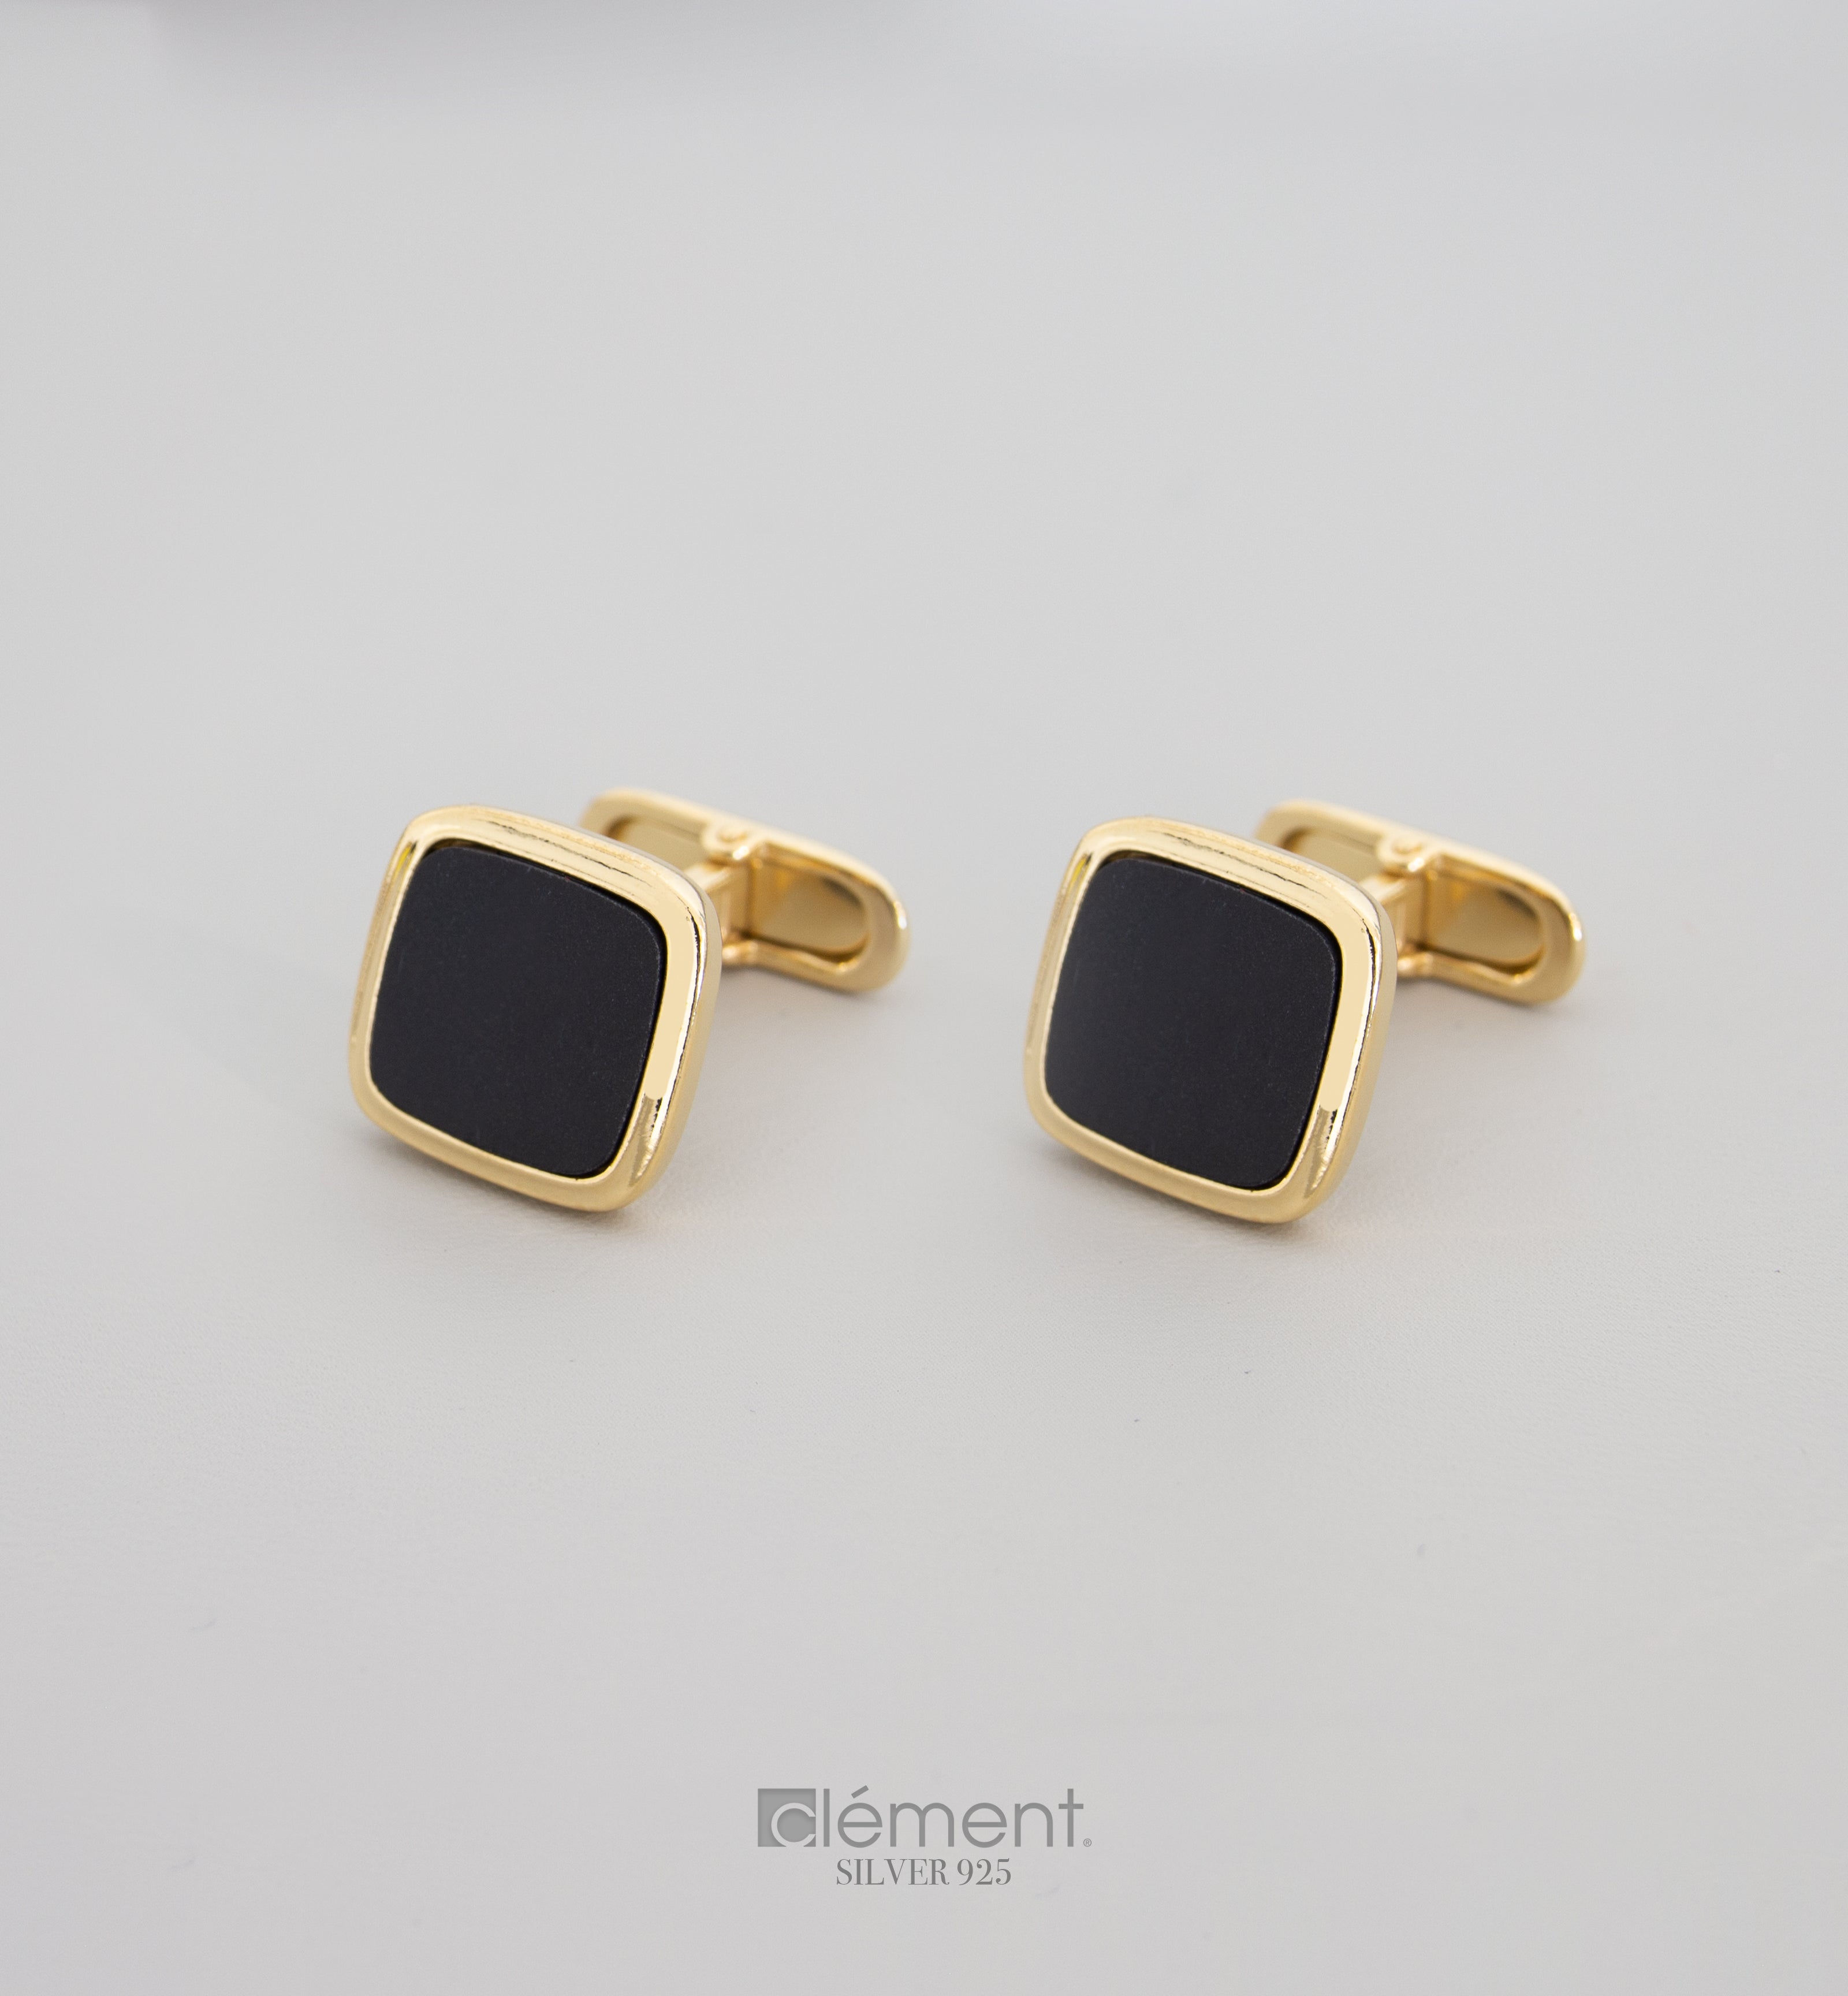 Silver 925 Square Cufflinks with Black Onyx